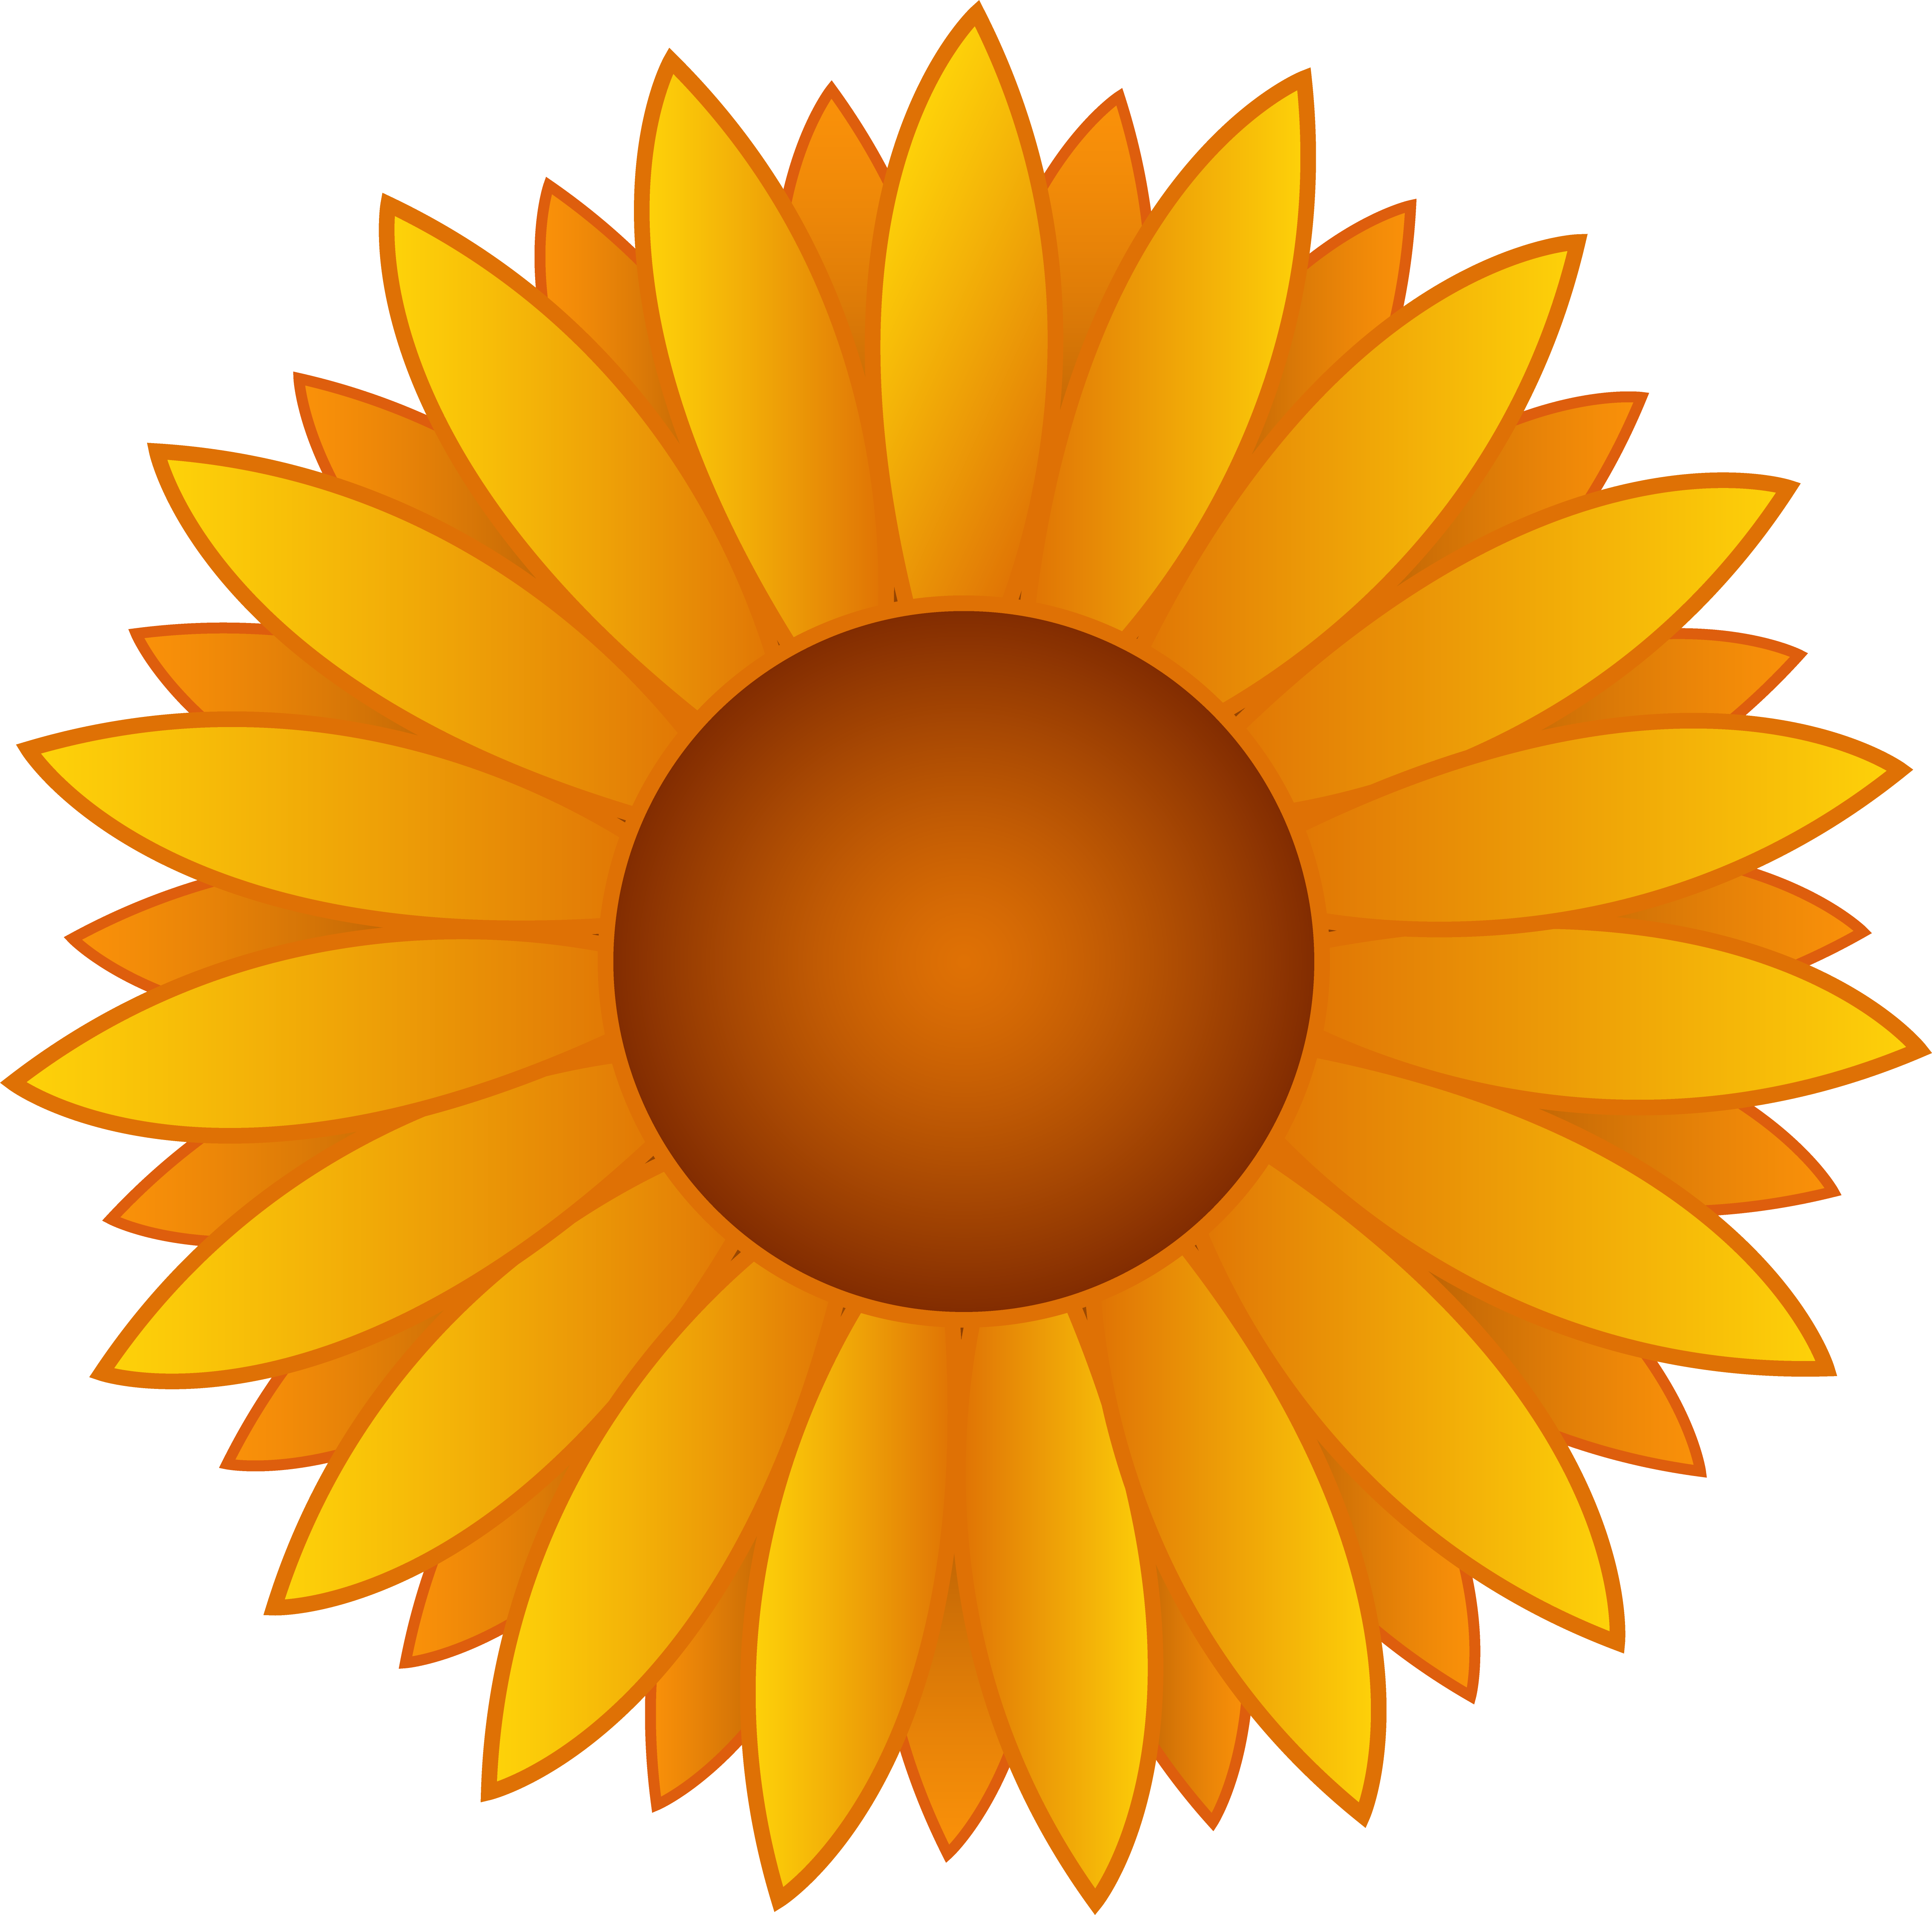 Sunflower Clipart Black And White | Clipart Panda - Free Clipart ...